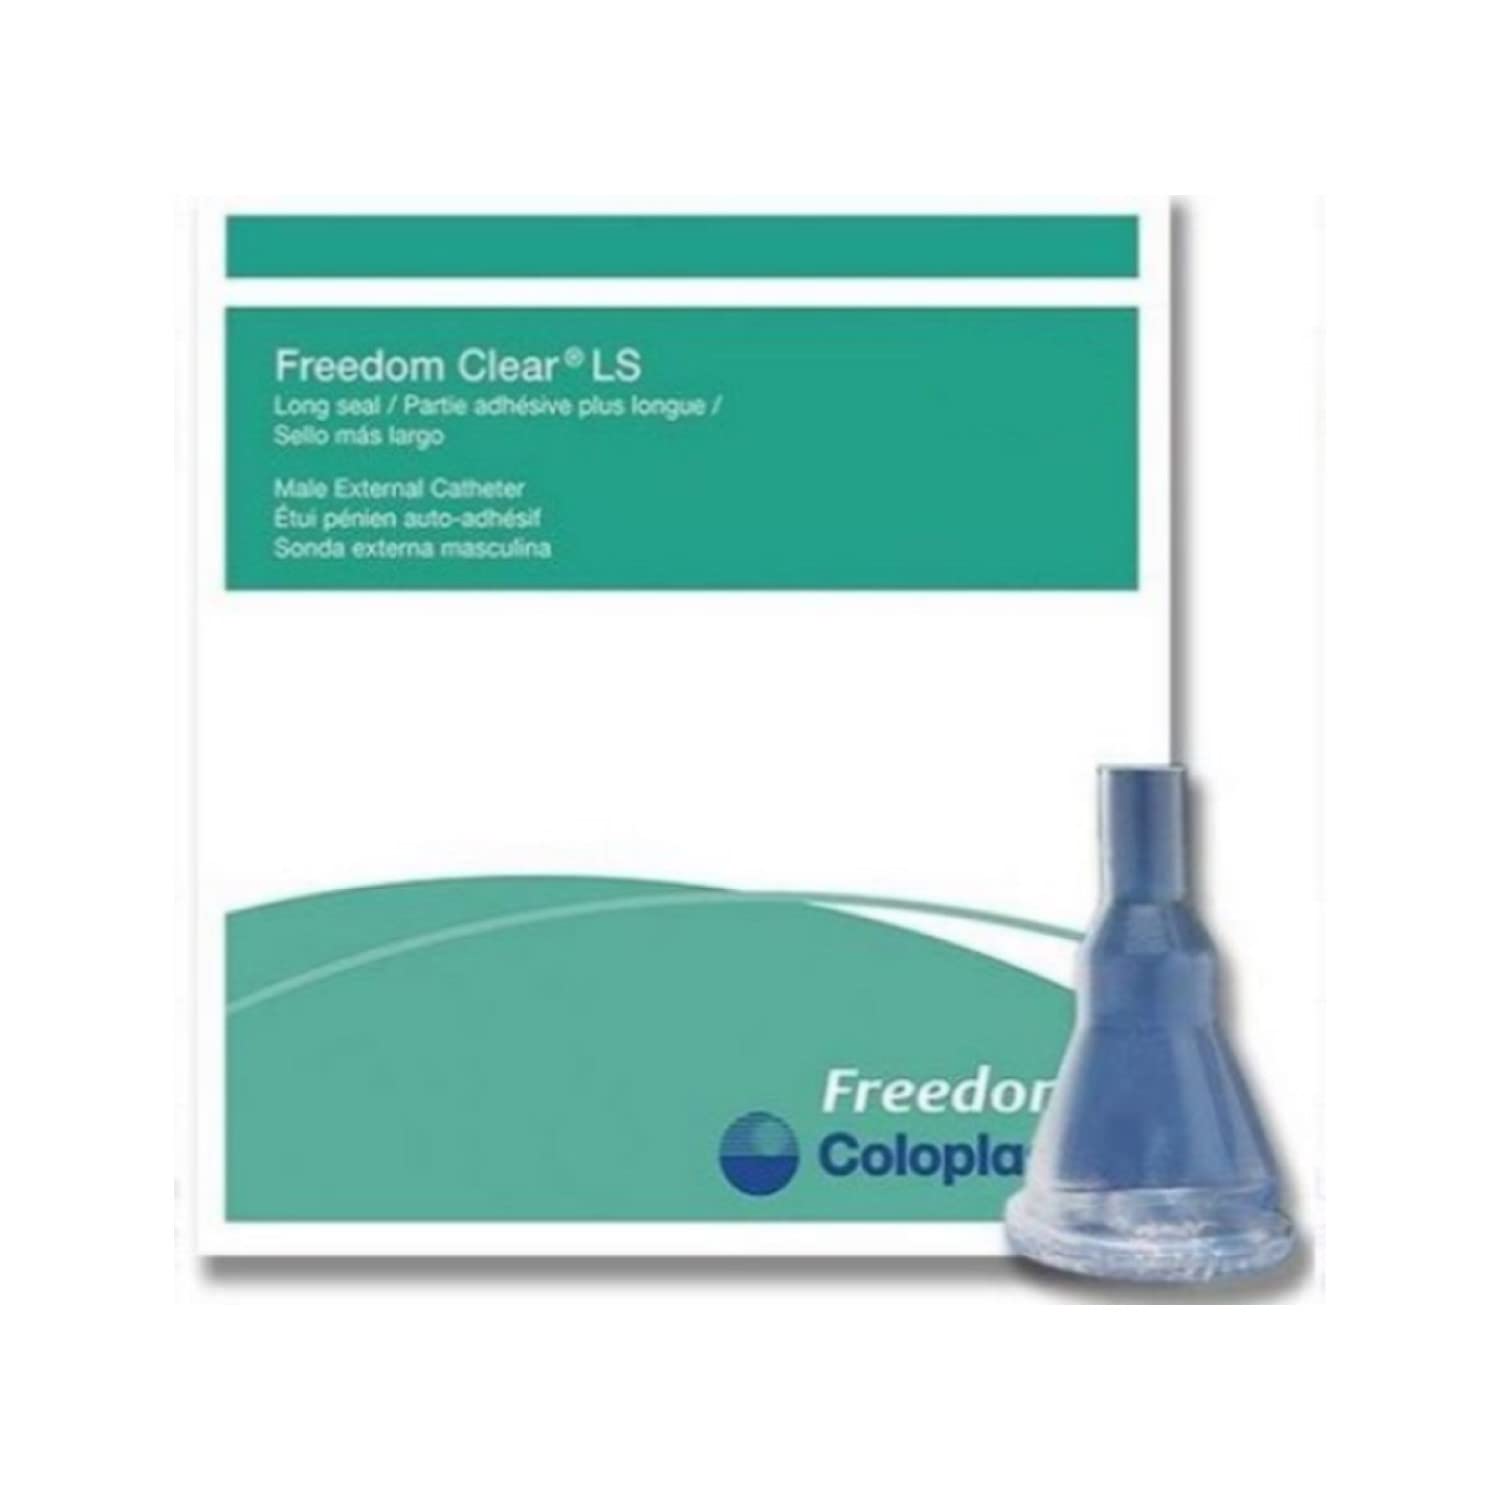 Freedom Clear LS Male External Catheter